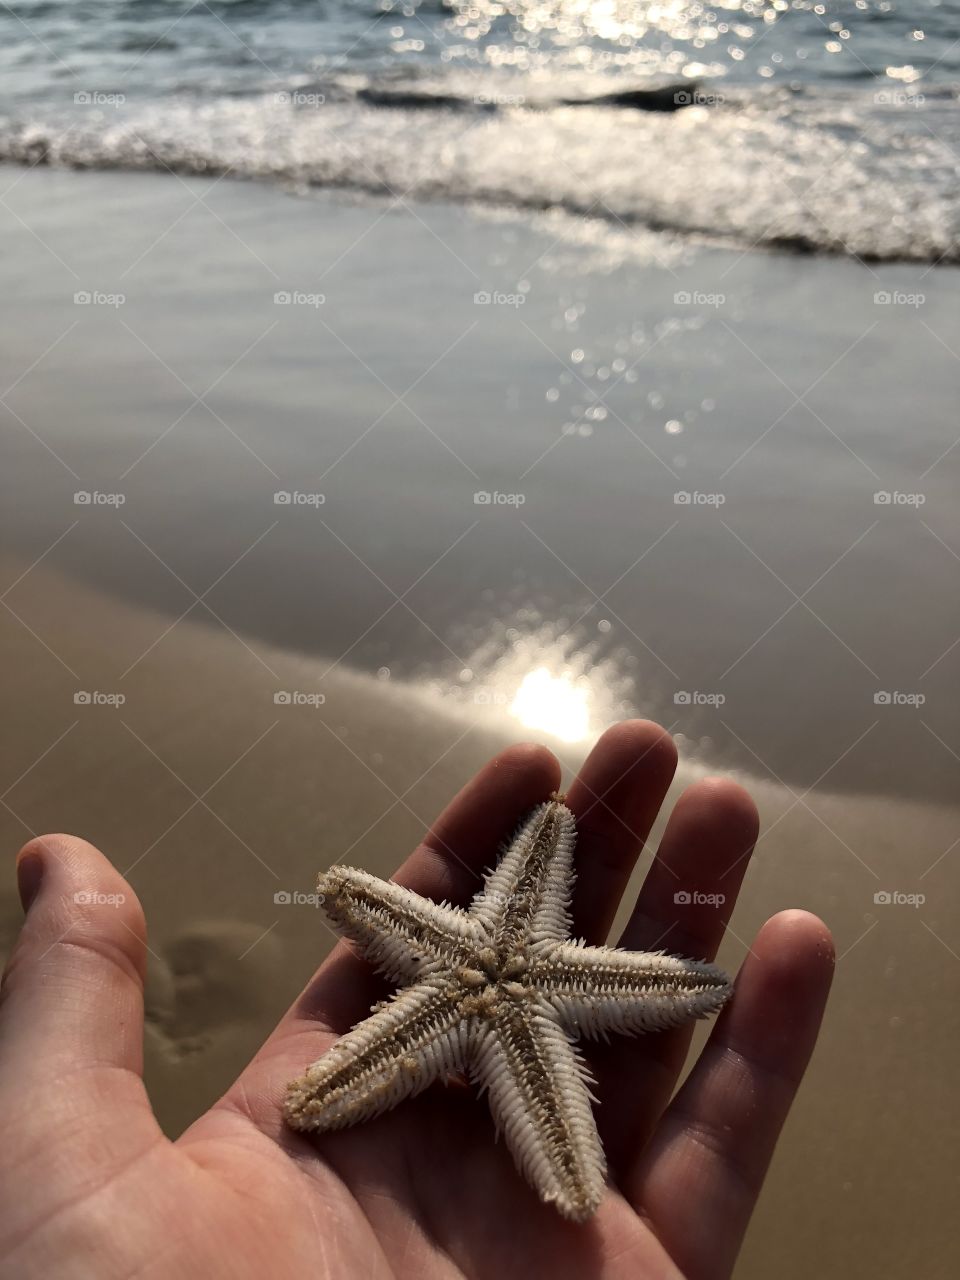 Holding A Starfish In My Hand At The Beach Near The Ocean